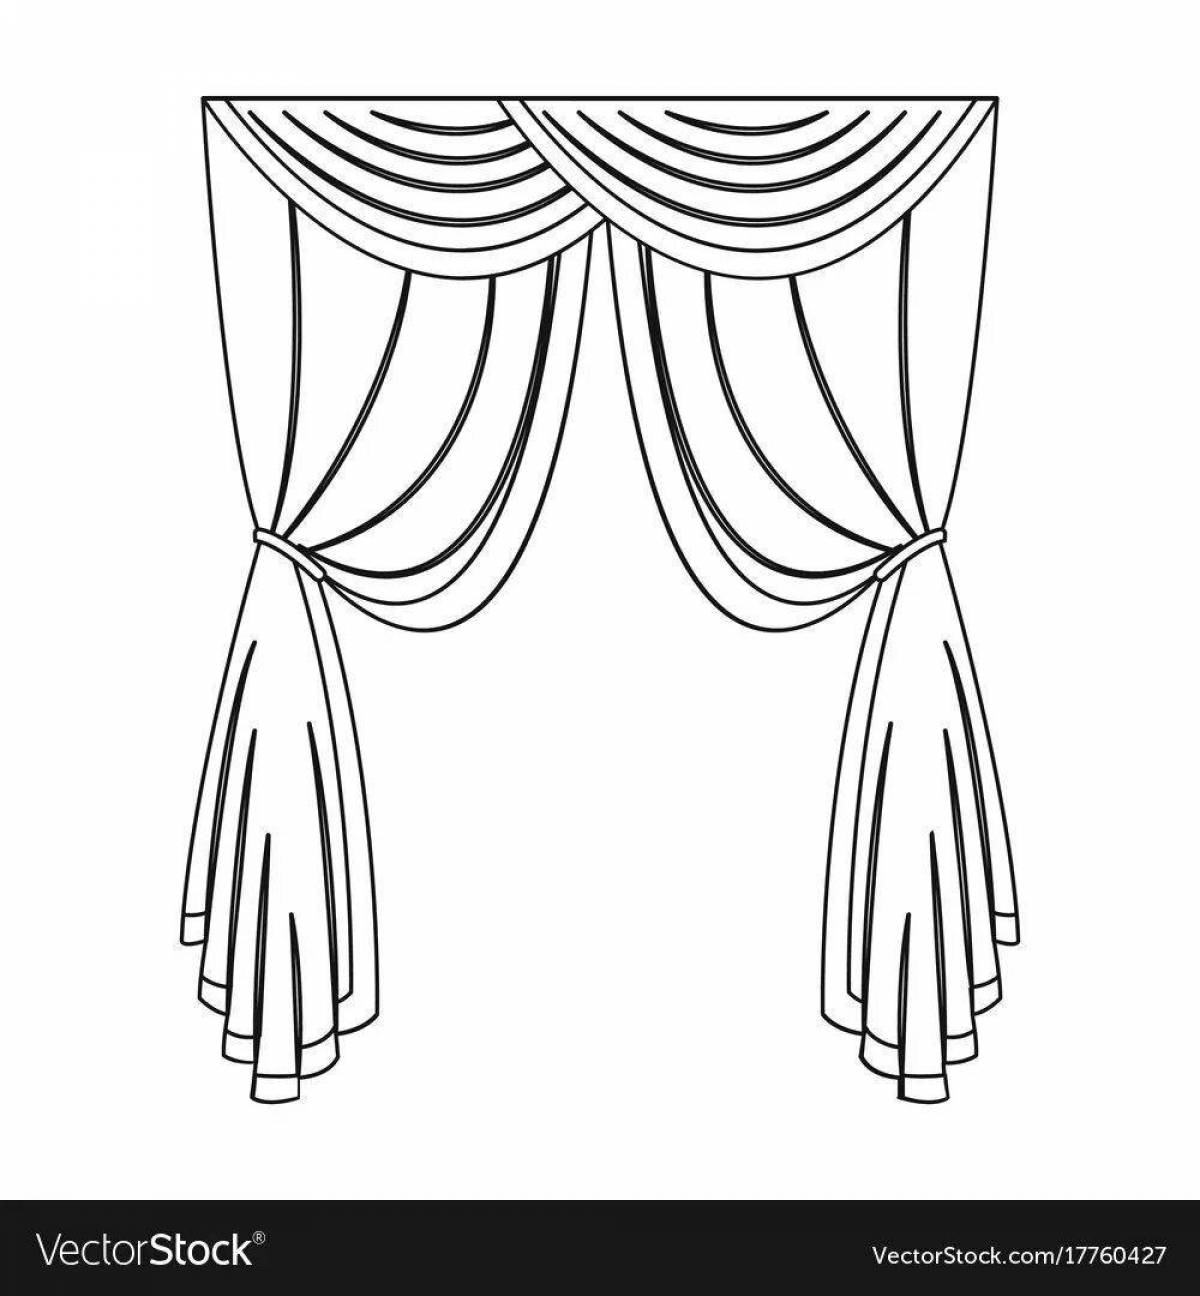 Coloring page glowing theater curtain